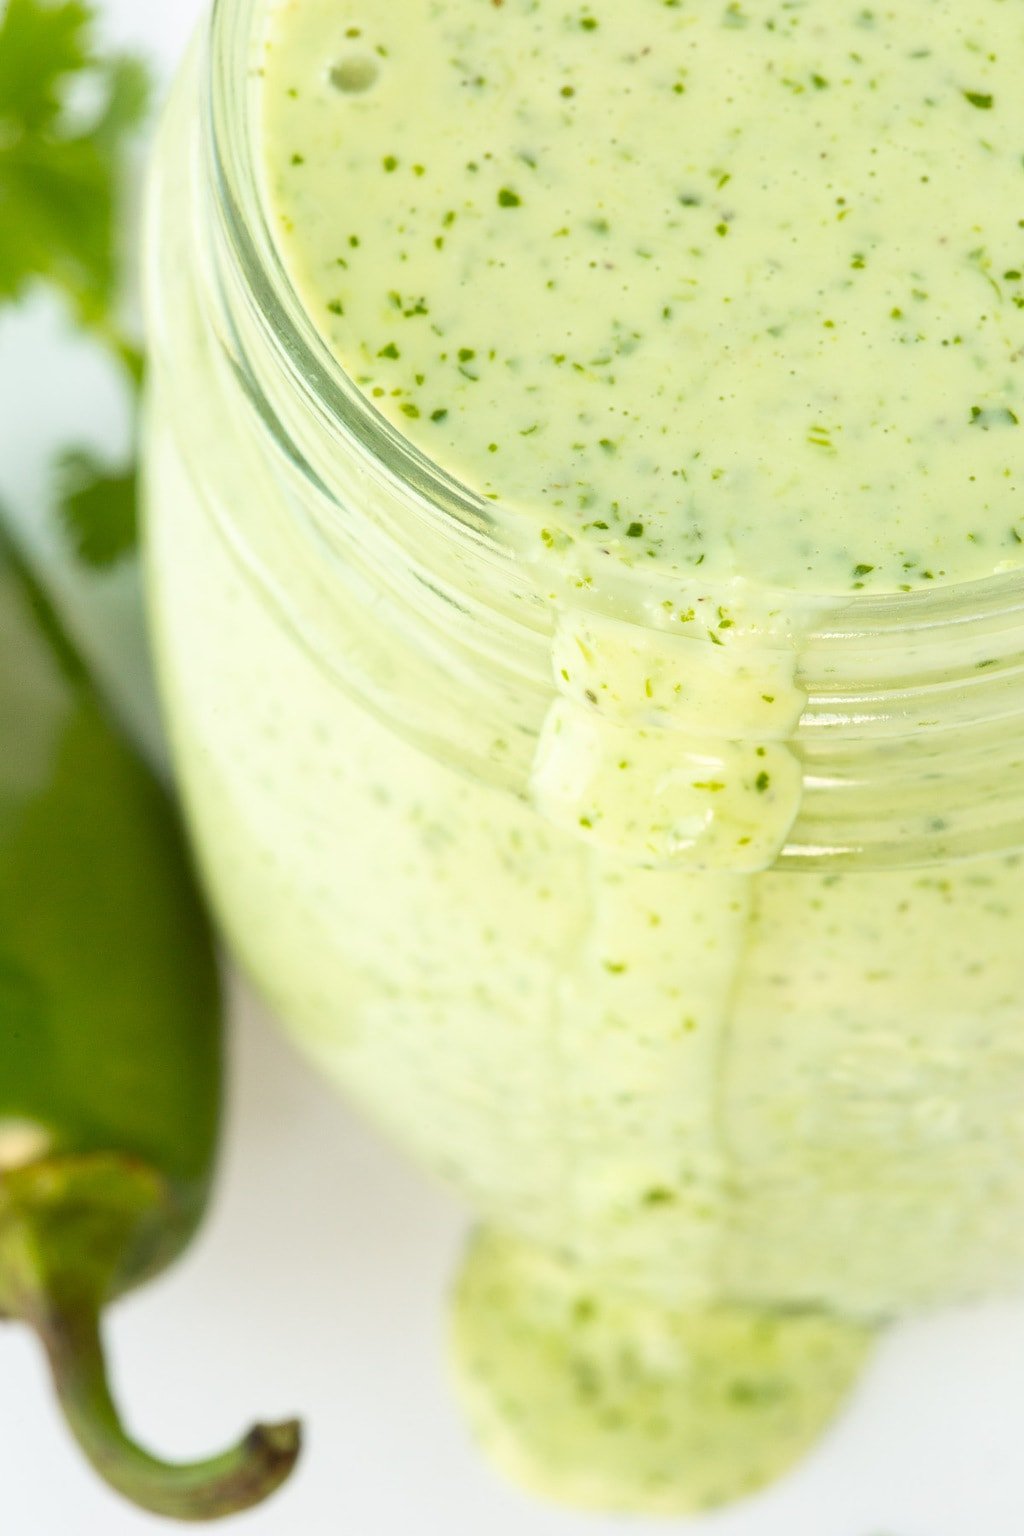 Vertical ultra closeup photo of a glass jar of Light and Spicy Cilantro Buttermilk Dressing.